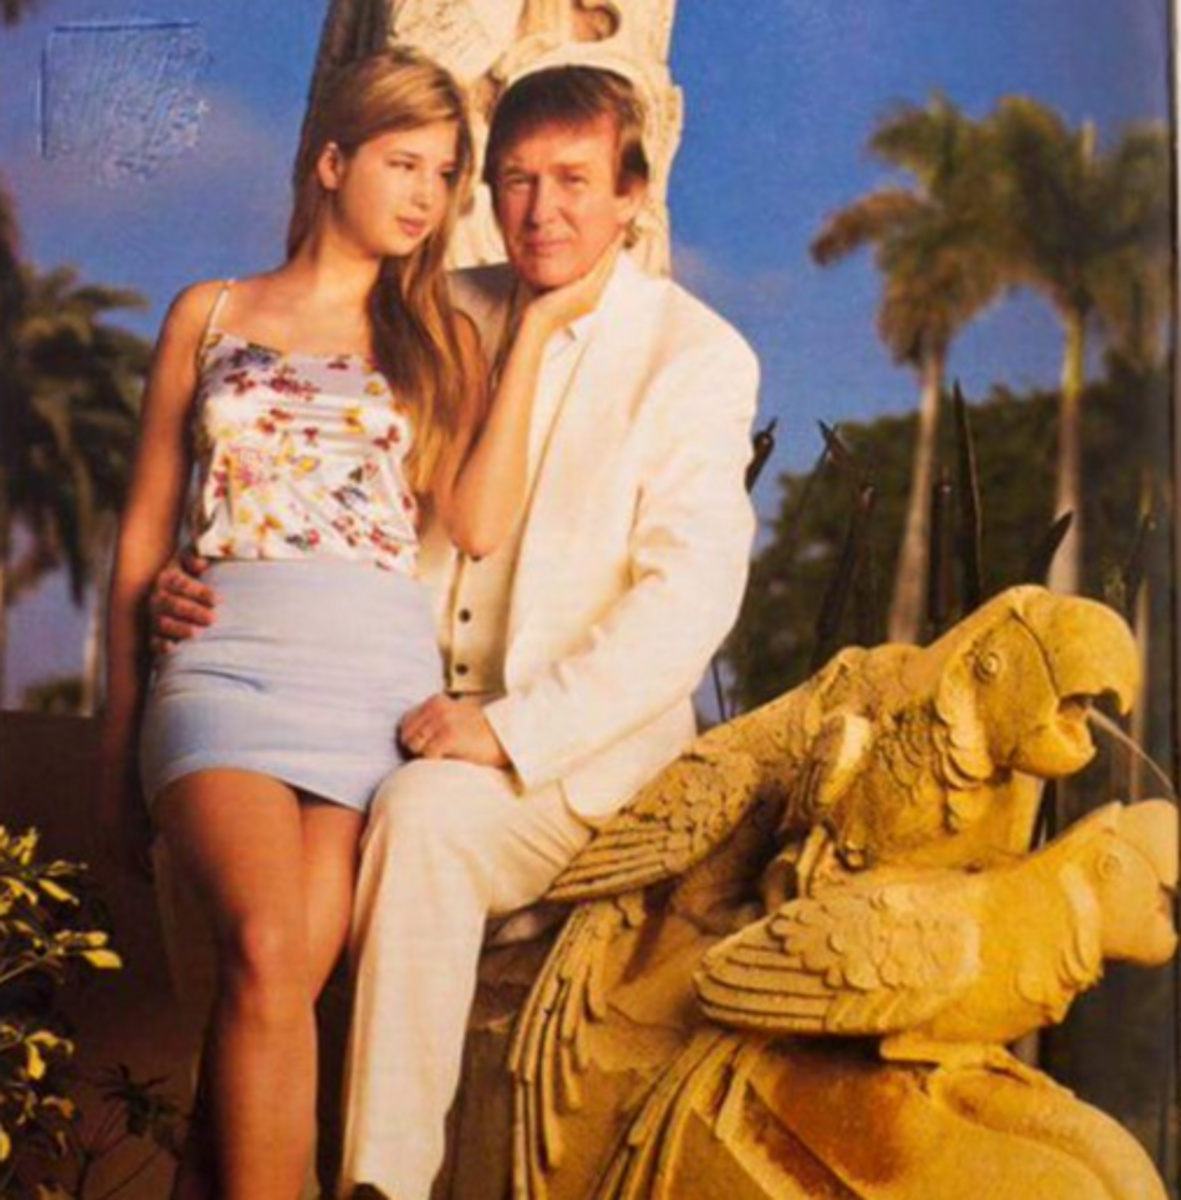 Donald Trump’s Strangely Sexual Relationship With His Daughter Ivanka